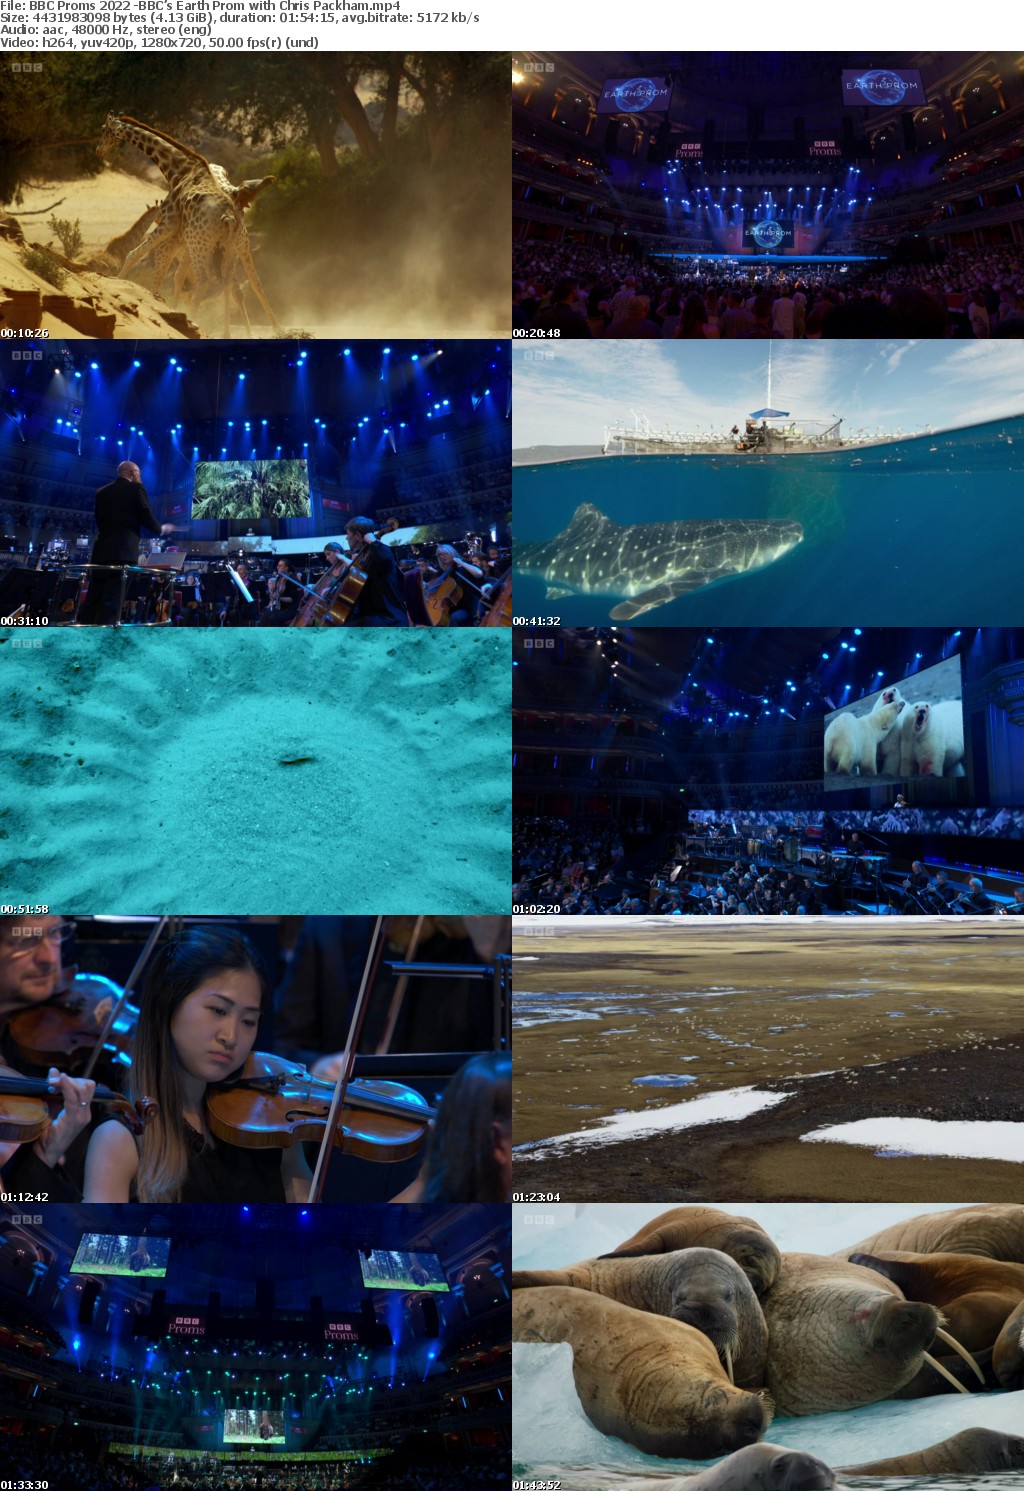 BBC Proms 2022 -BBCs Earth Prom with Chris Packham (1280x720p HD, 50fps, soft Eng subs)